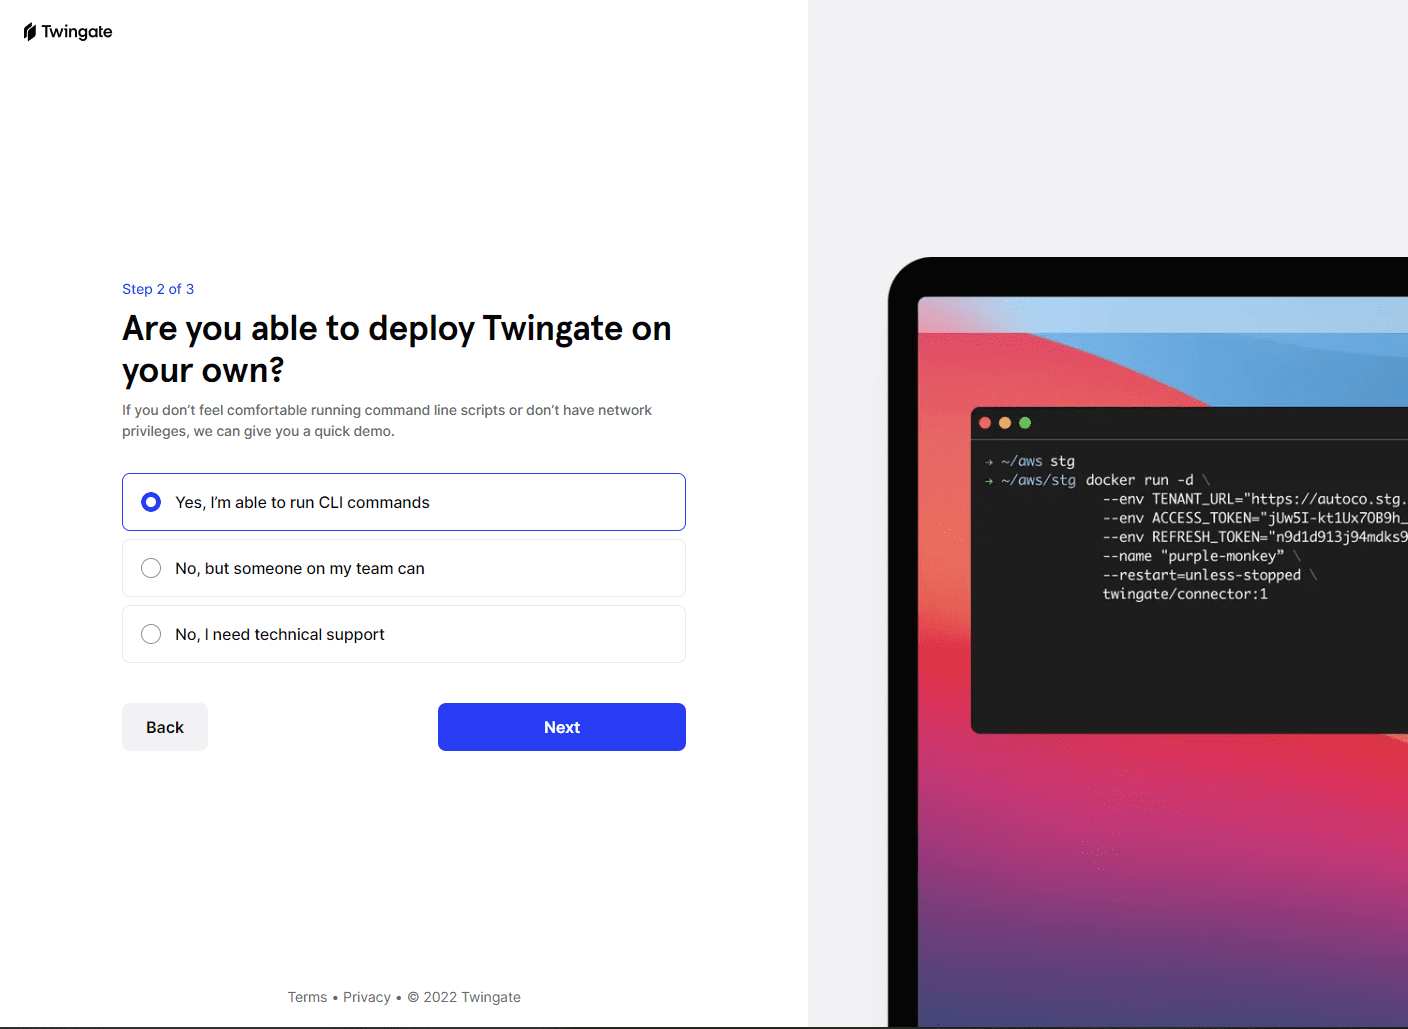 Step 2 are you able to deploy Twingate on your own